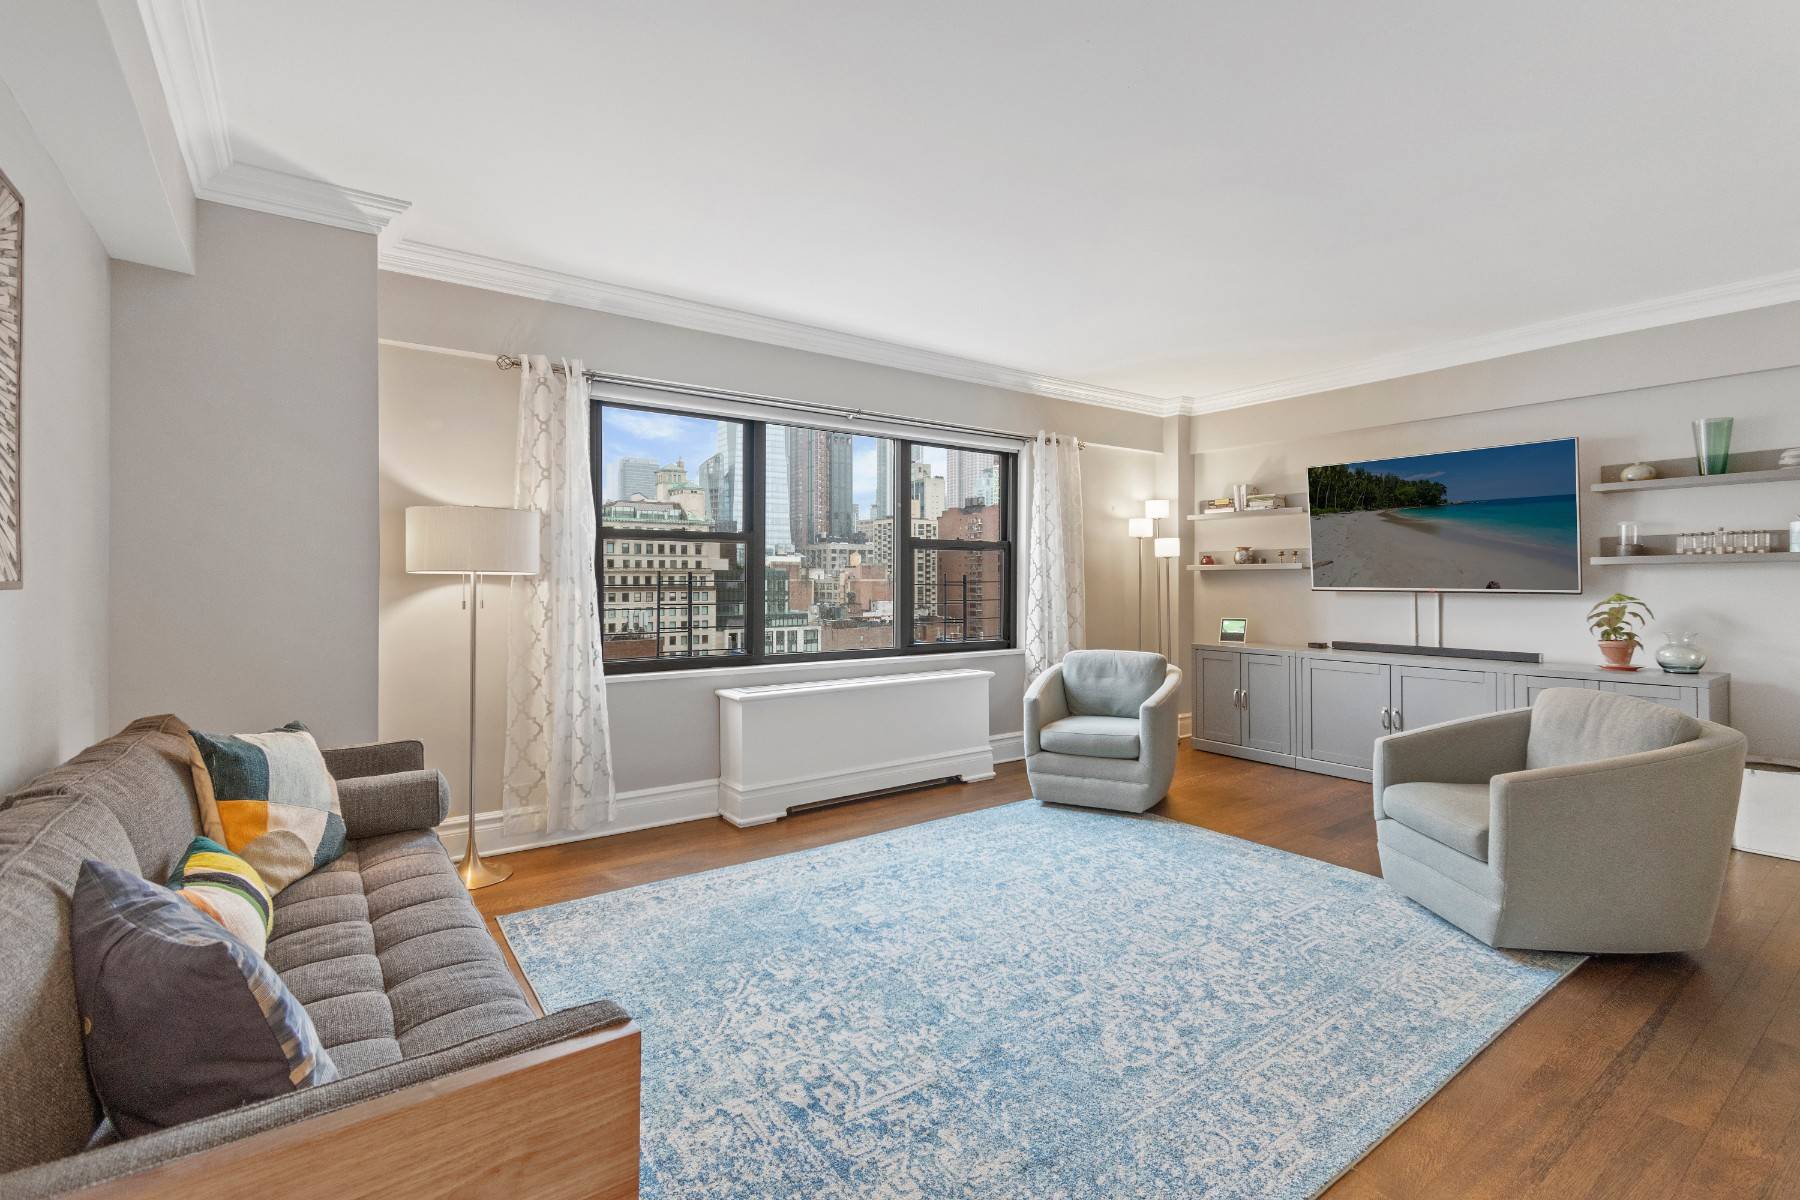 Perched on the top floor with unobstructed views of the Empire State Building and the Manhattan skyline, this 3 bedroom apartment benefits from excellent lighting throughout as a result of ...